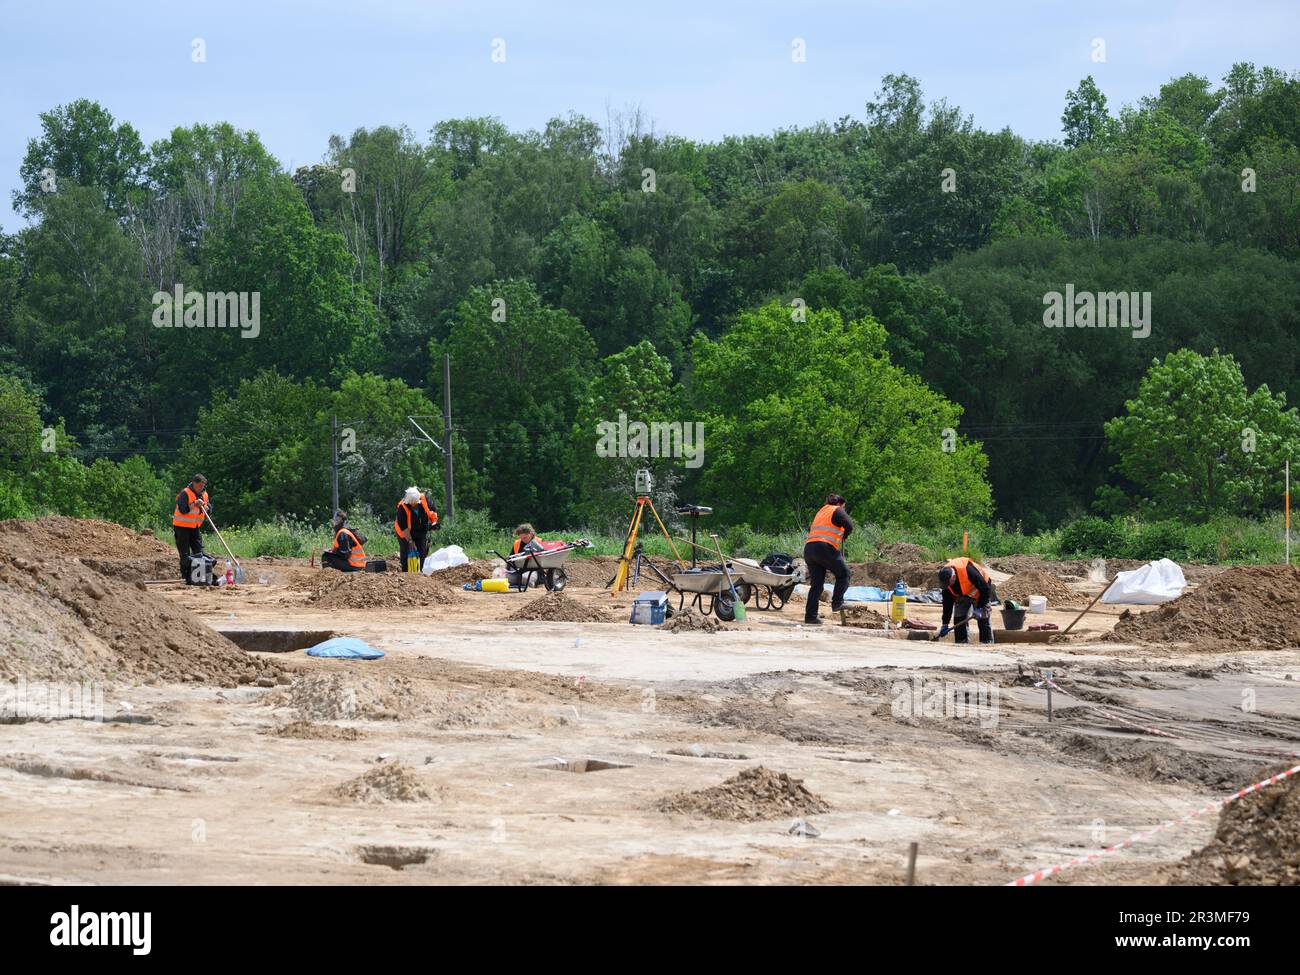 24 May 2023, Saxony, Döbeln: Employees of the Saxony State Office for Archaeology work during excavations on the construction site of the future 'Karls Erlebnisdorf'. Since fall 2021, the Saxony State Office for Archaeology has been conducting extensive excavations on the 17-hectare site of the future adventure village near Döbeln. With its wealth of finds and immense size, the site near Döbeln-Gärtitz is one of the largest settlement sites of the Early Neolithic period (5,500 - 4,500 BC) in the Middle Saxon loess region known to date. Photo: Robert Michael/dpa Stock Photo